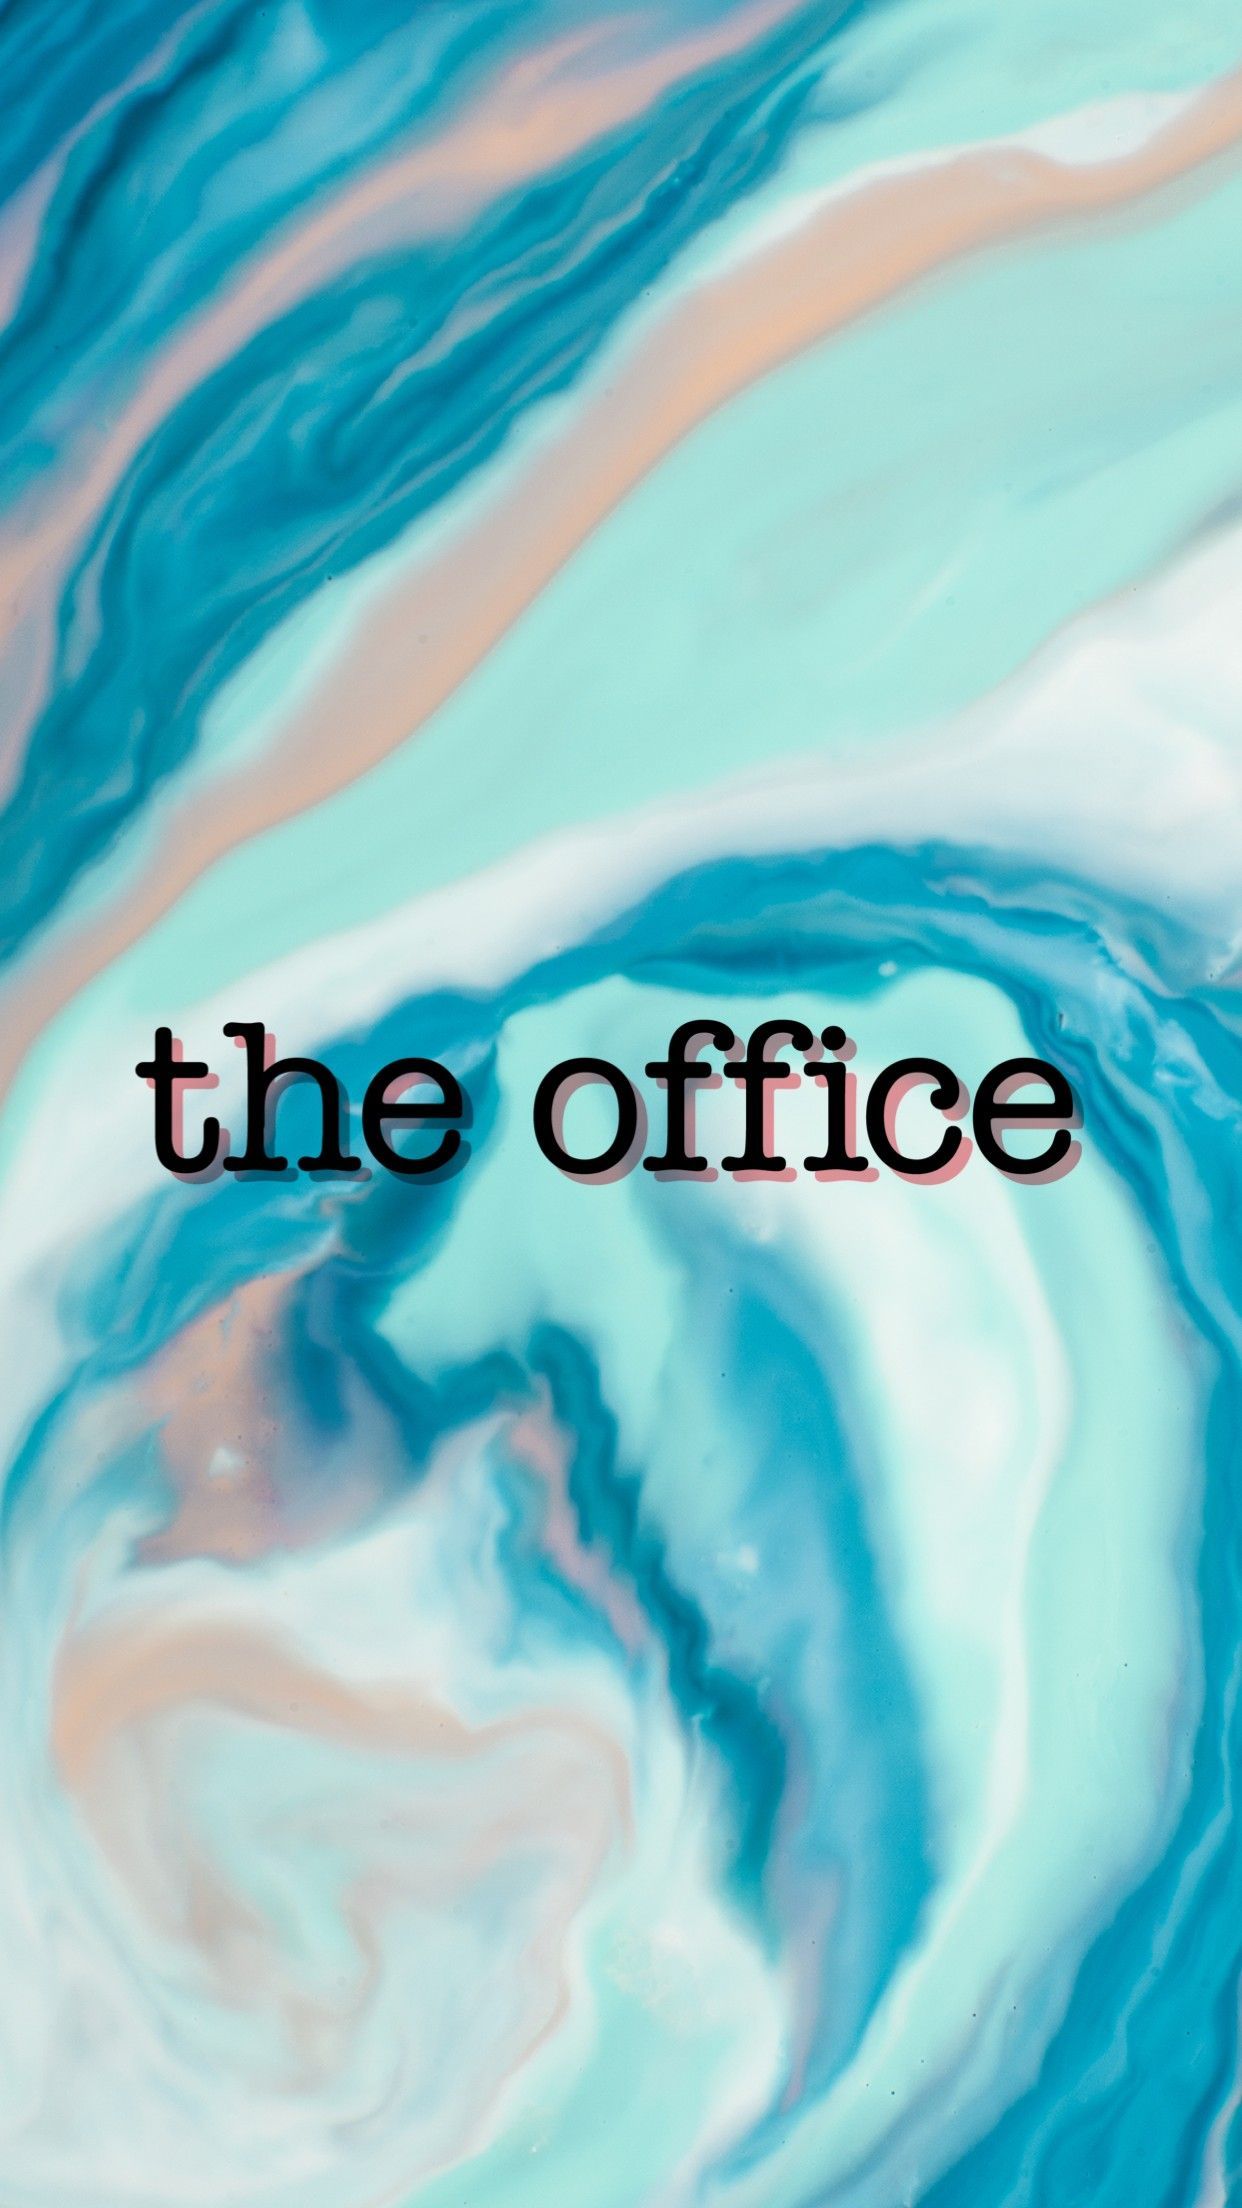 The office - The Office